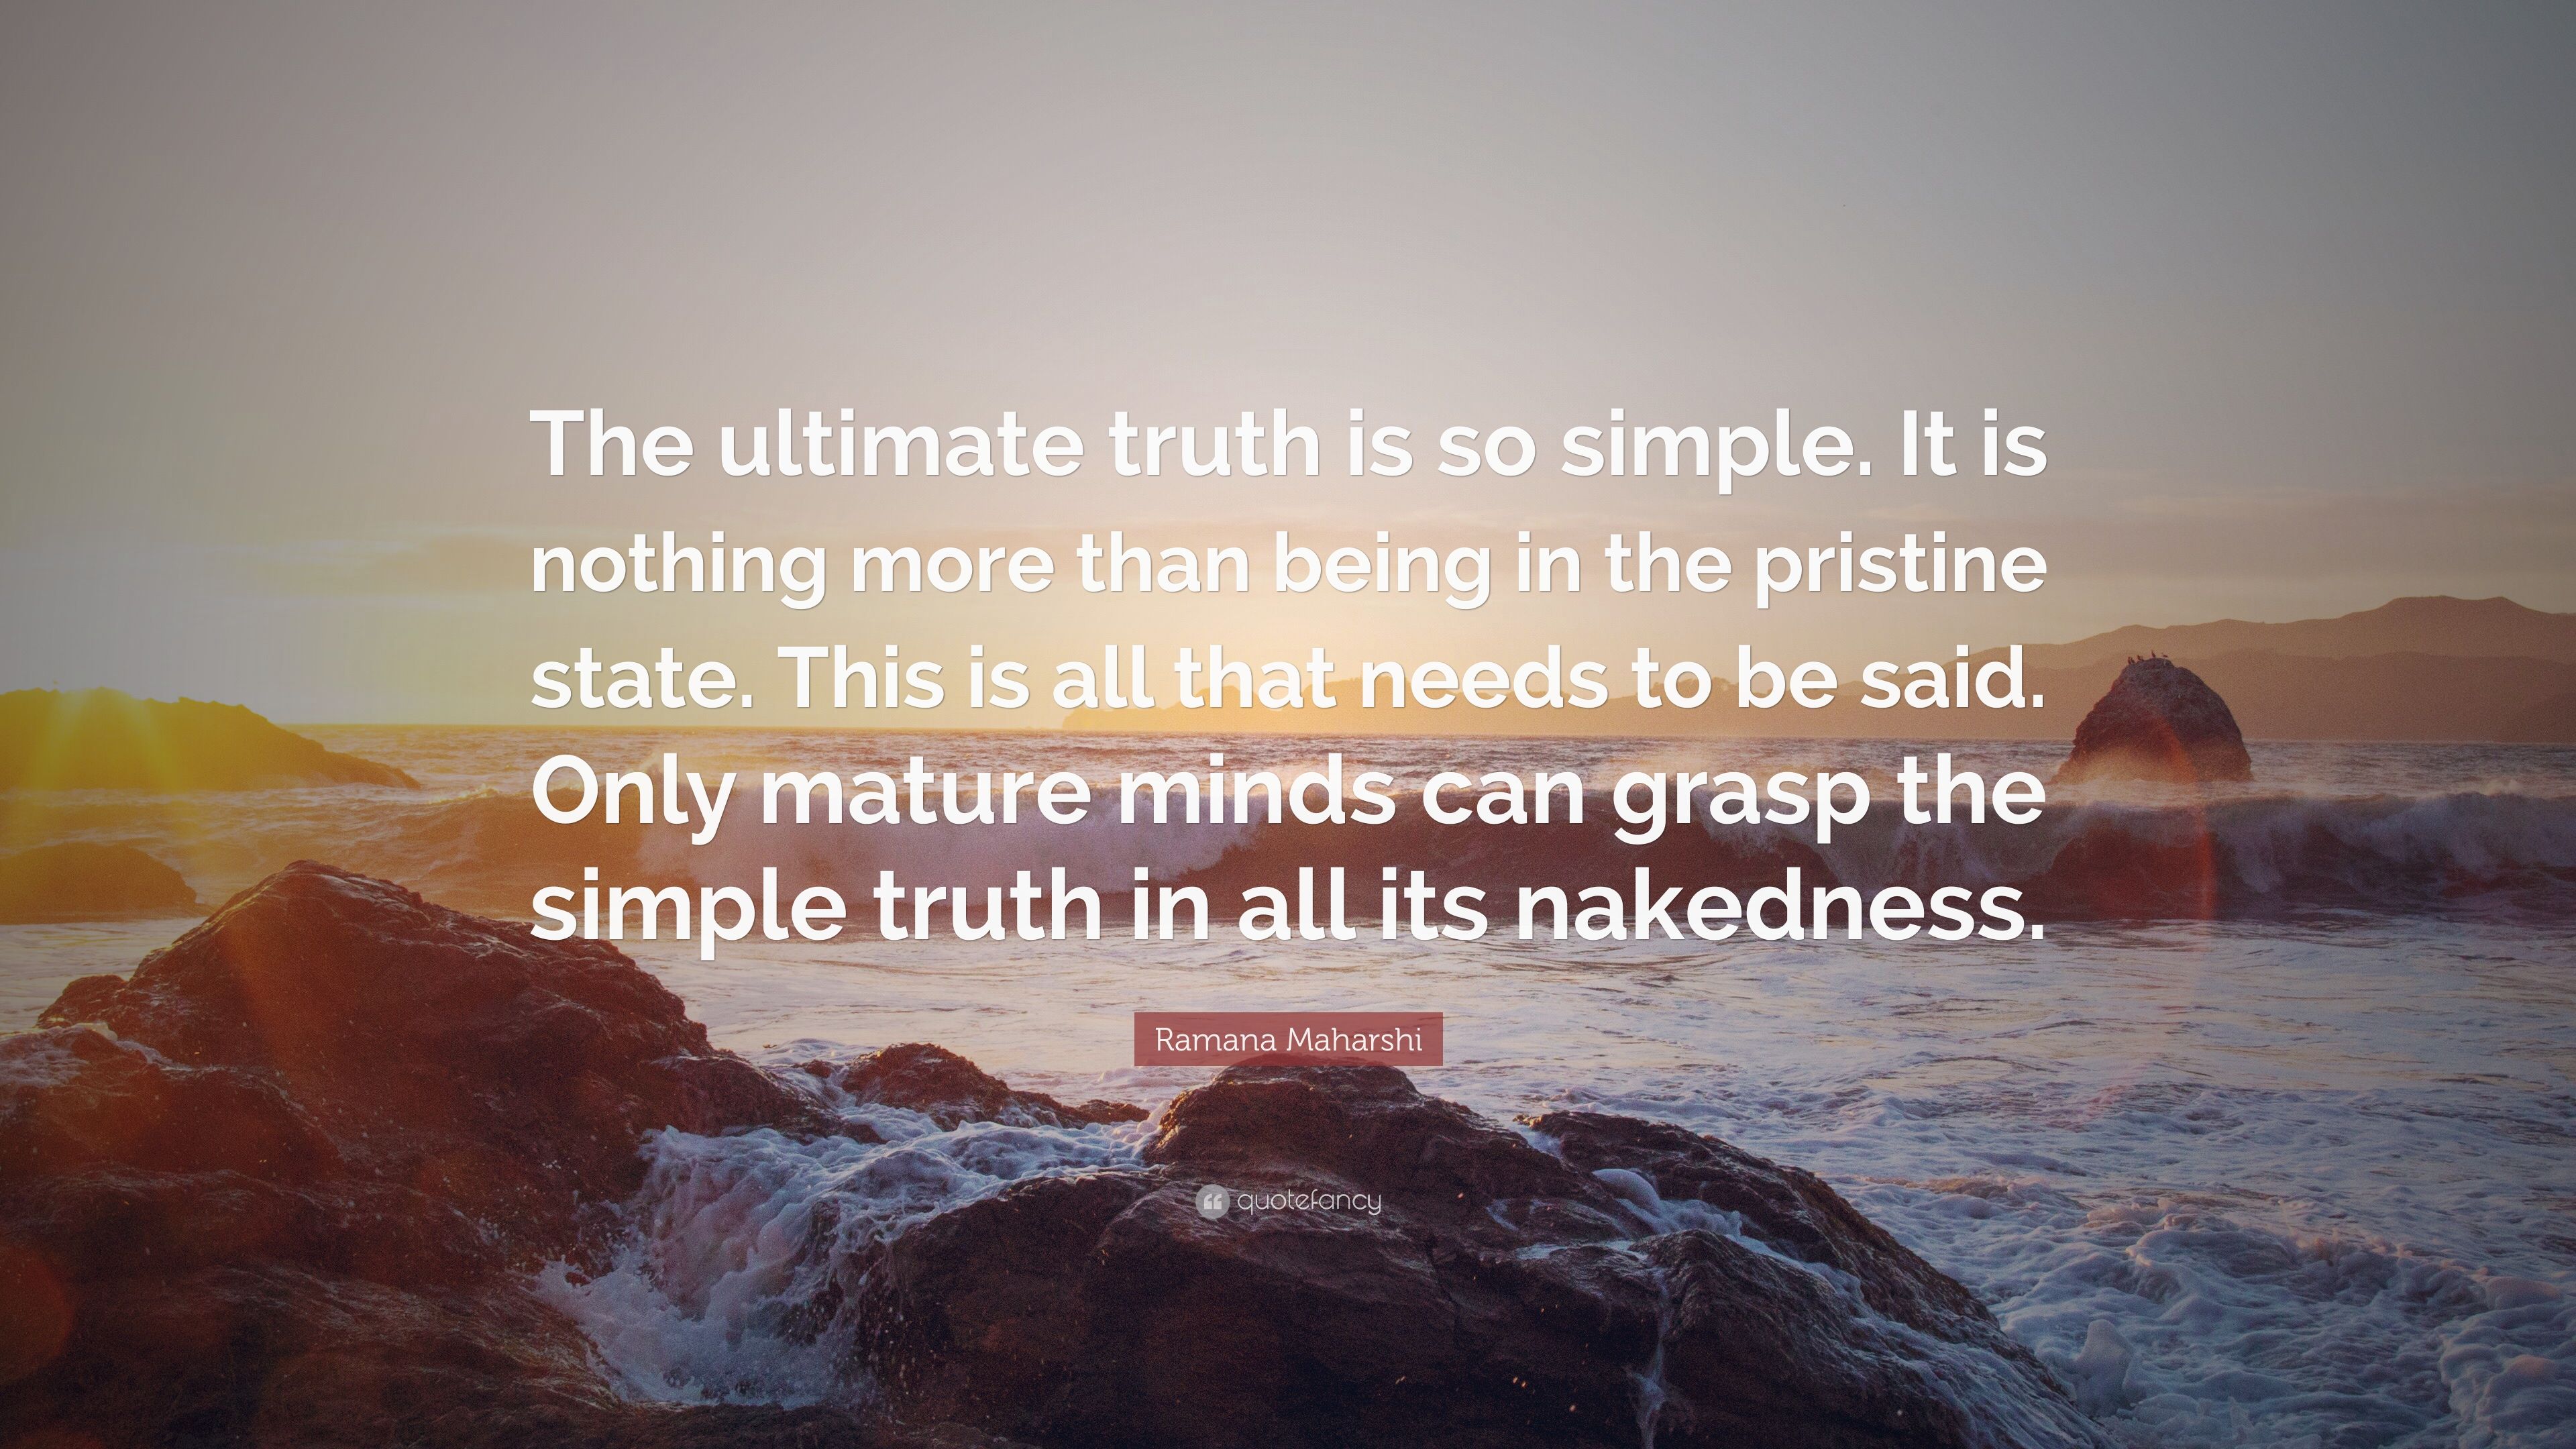 Ramana Maharshi Quote: “The ultimate truth is so simple. It is